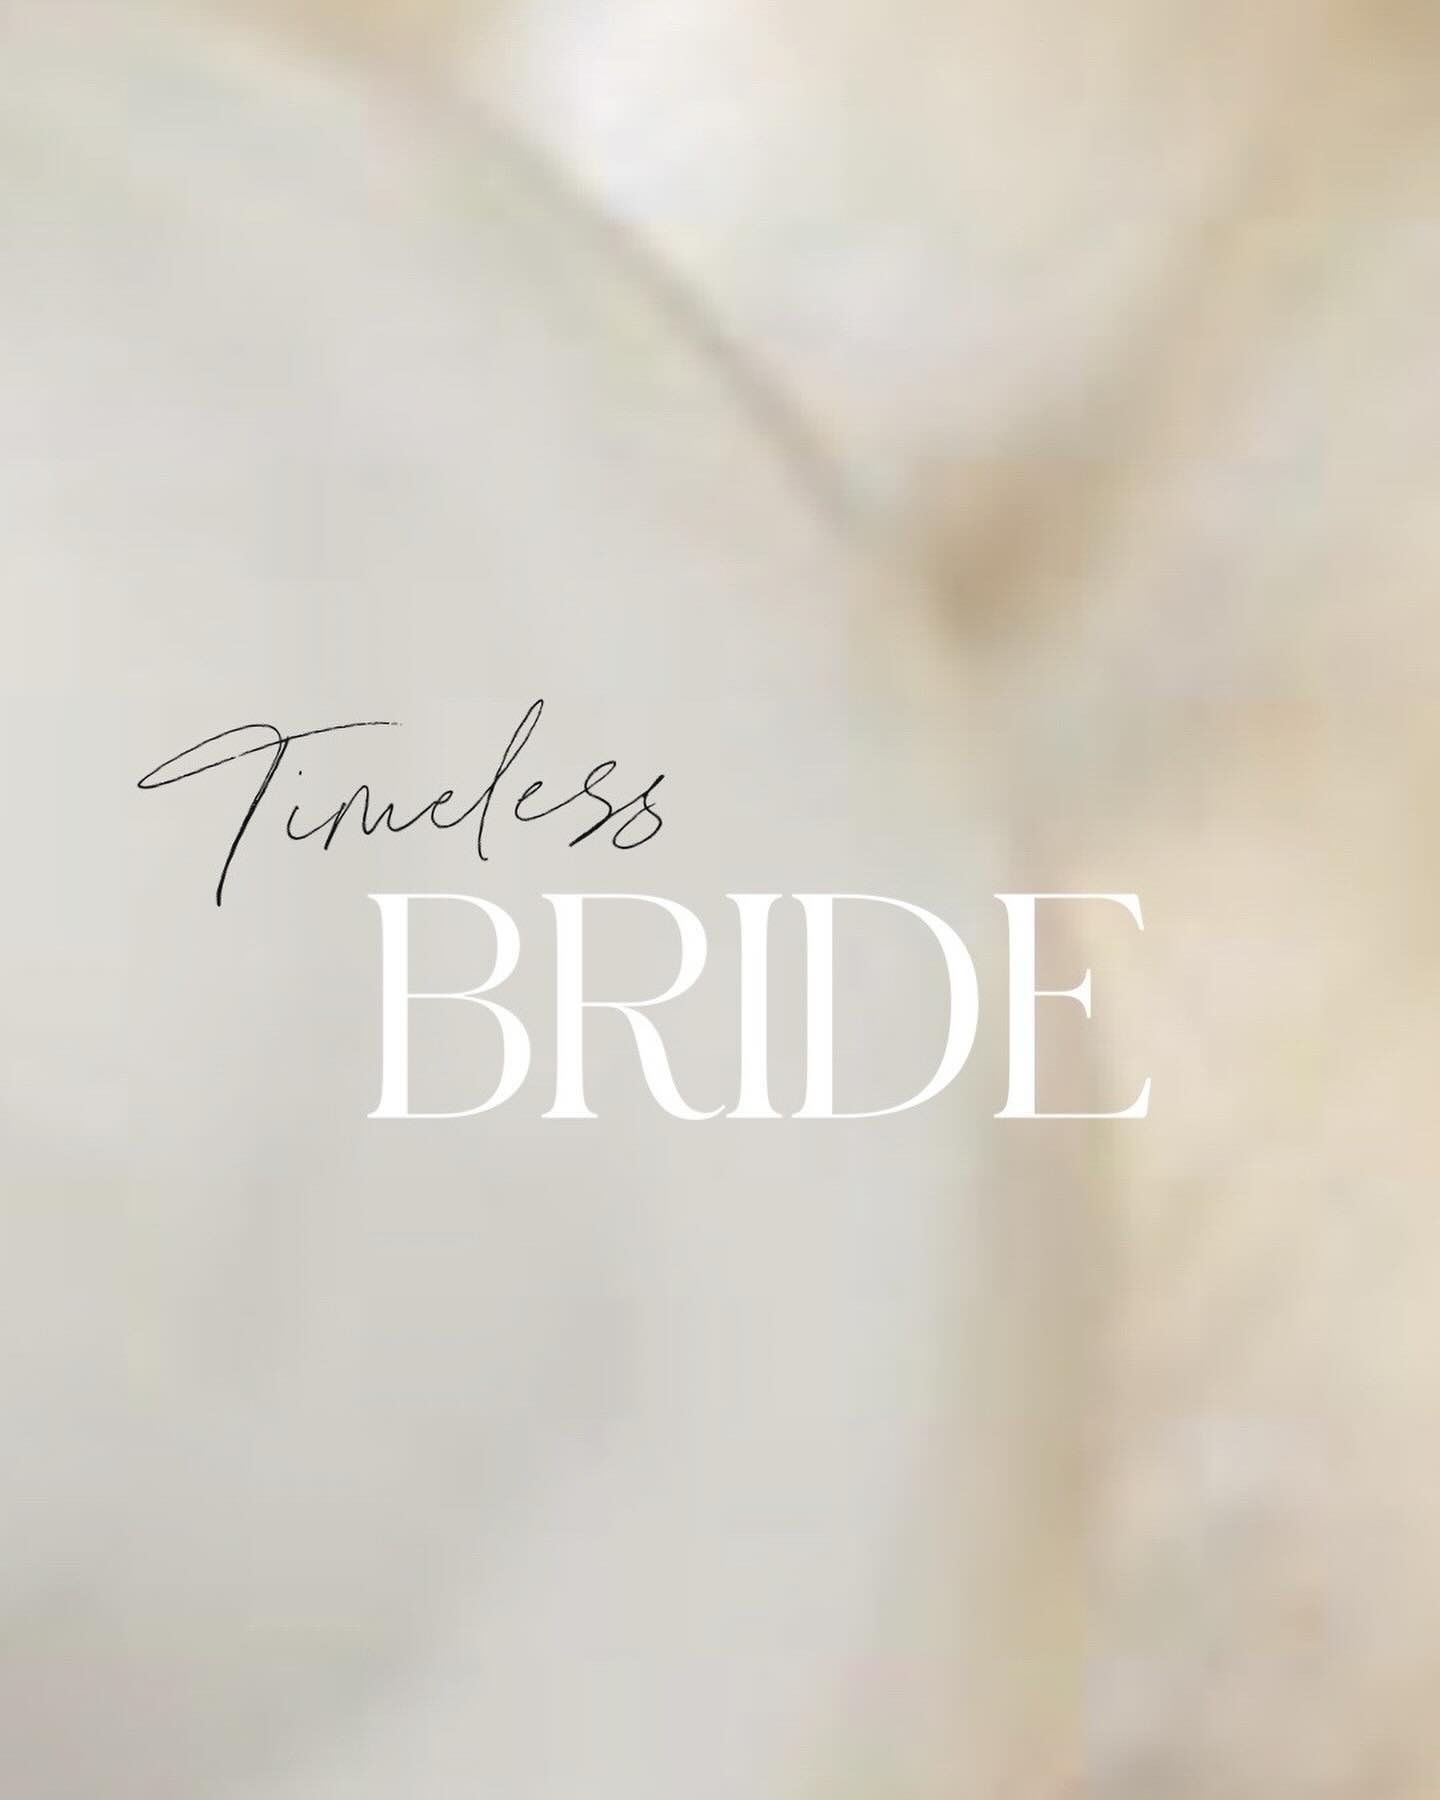 Smiles, laughter and happy tears all round when you find ✨the one✨ congratulations to our incredible Timeless brides! We love helping you and empowering you to make the right decision 🤍

Bibiana, Lowri, Megan, Charlotte, Chloe, Francesca, Abigail an